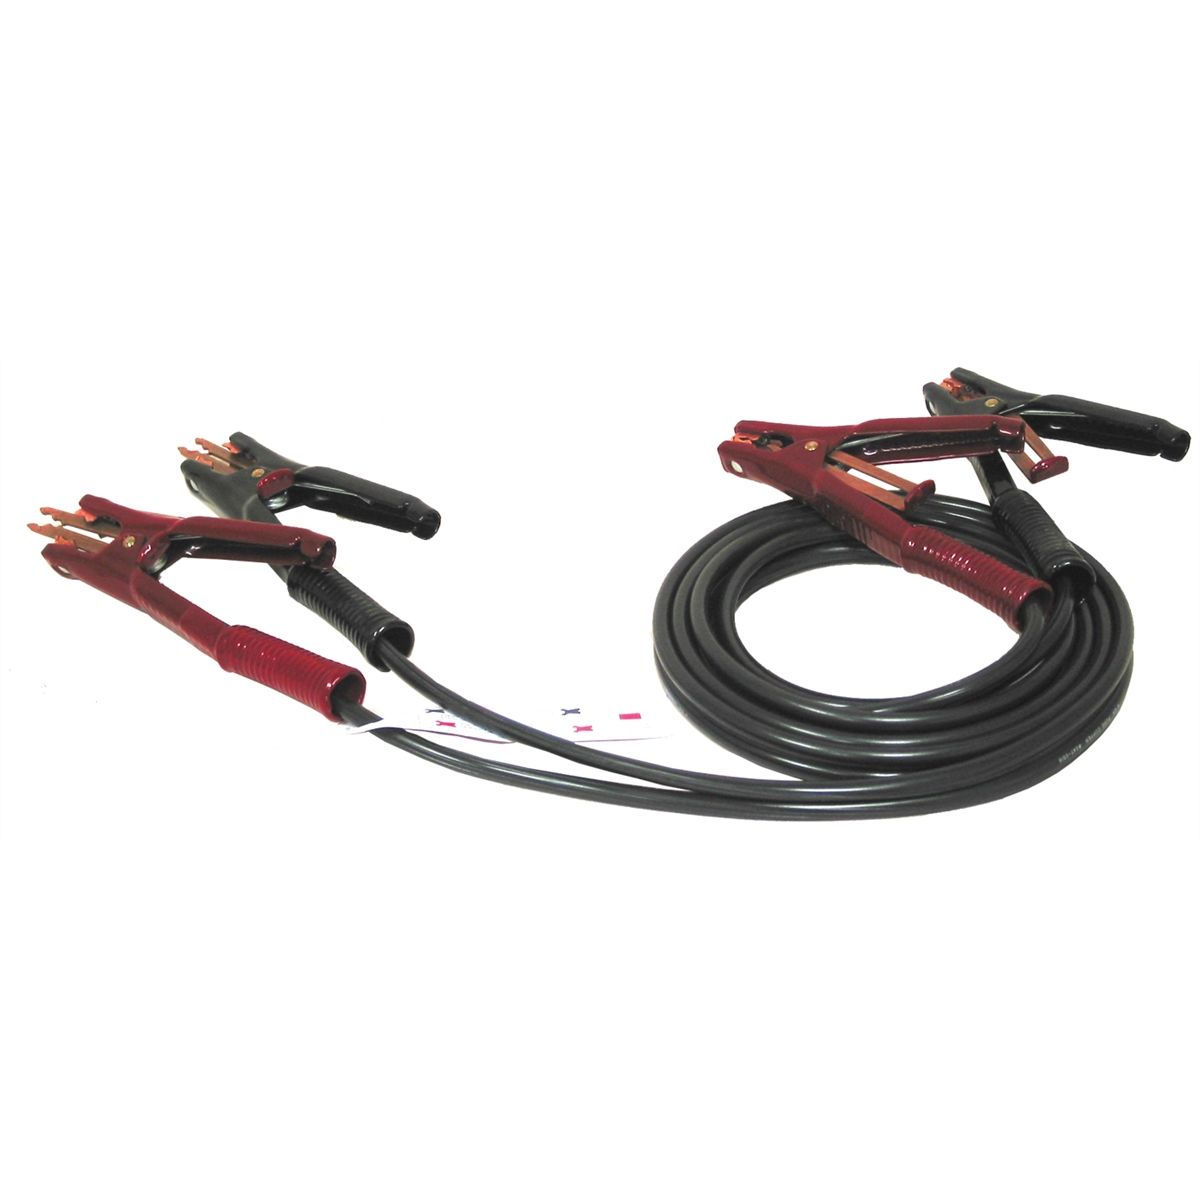 Battery Booster Jumper Cables - 12Ft 500 Amp Clamp...